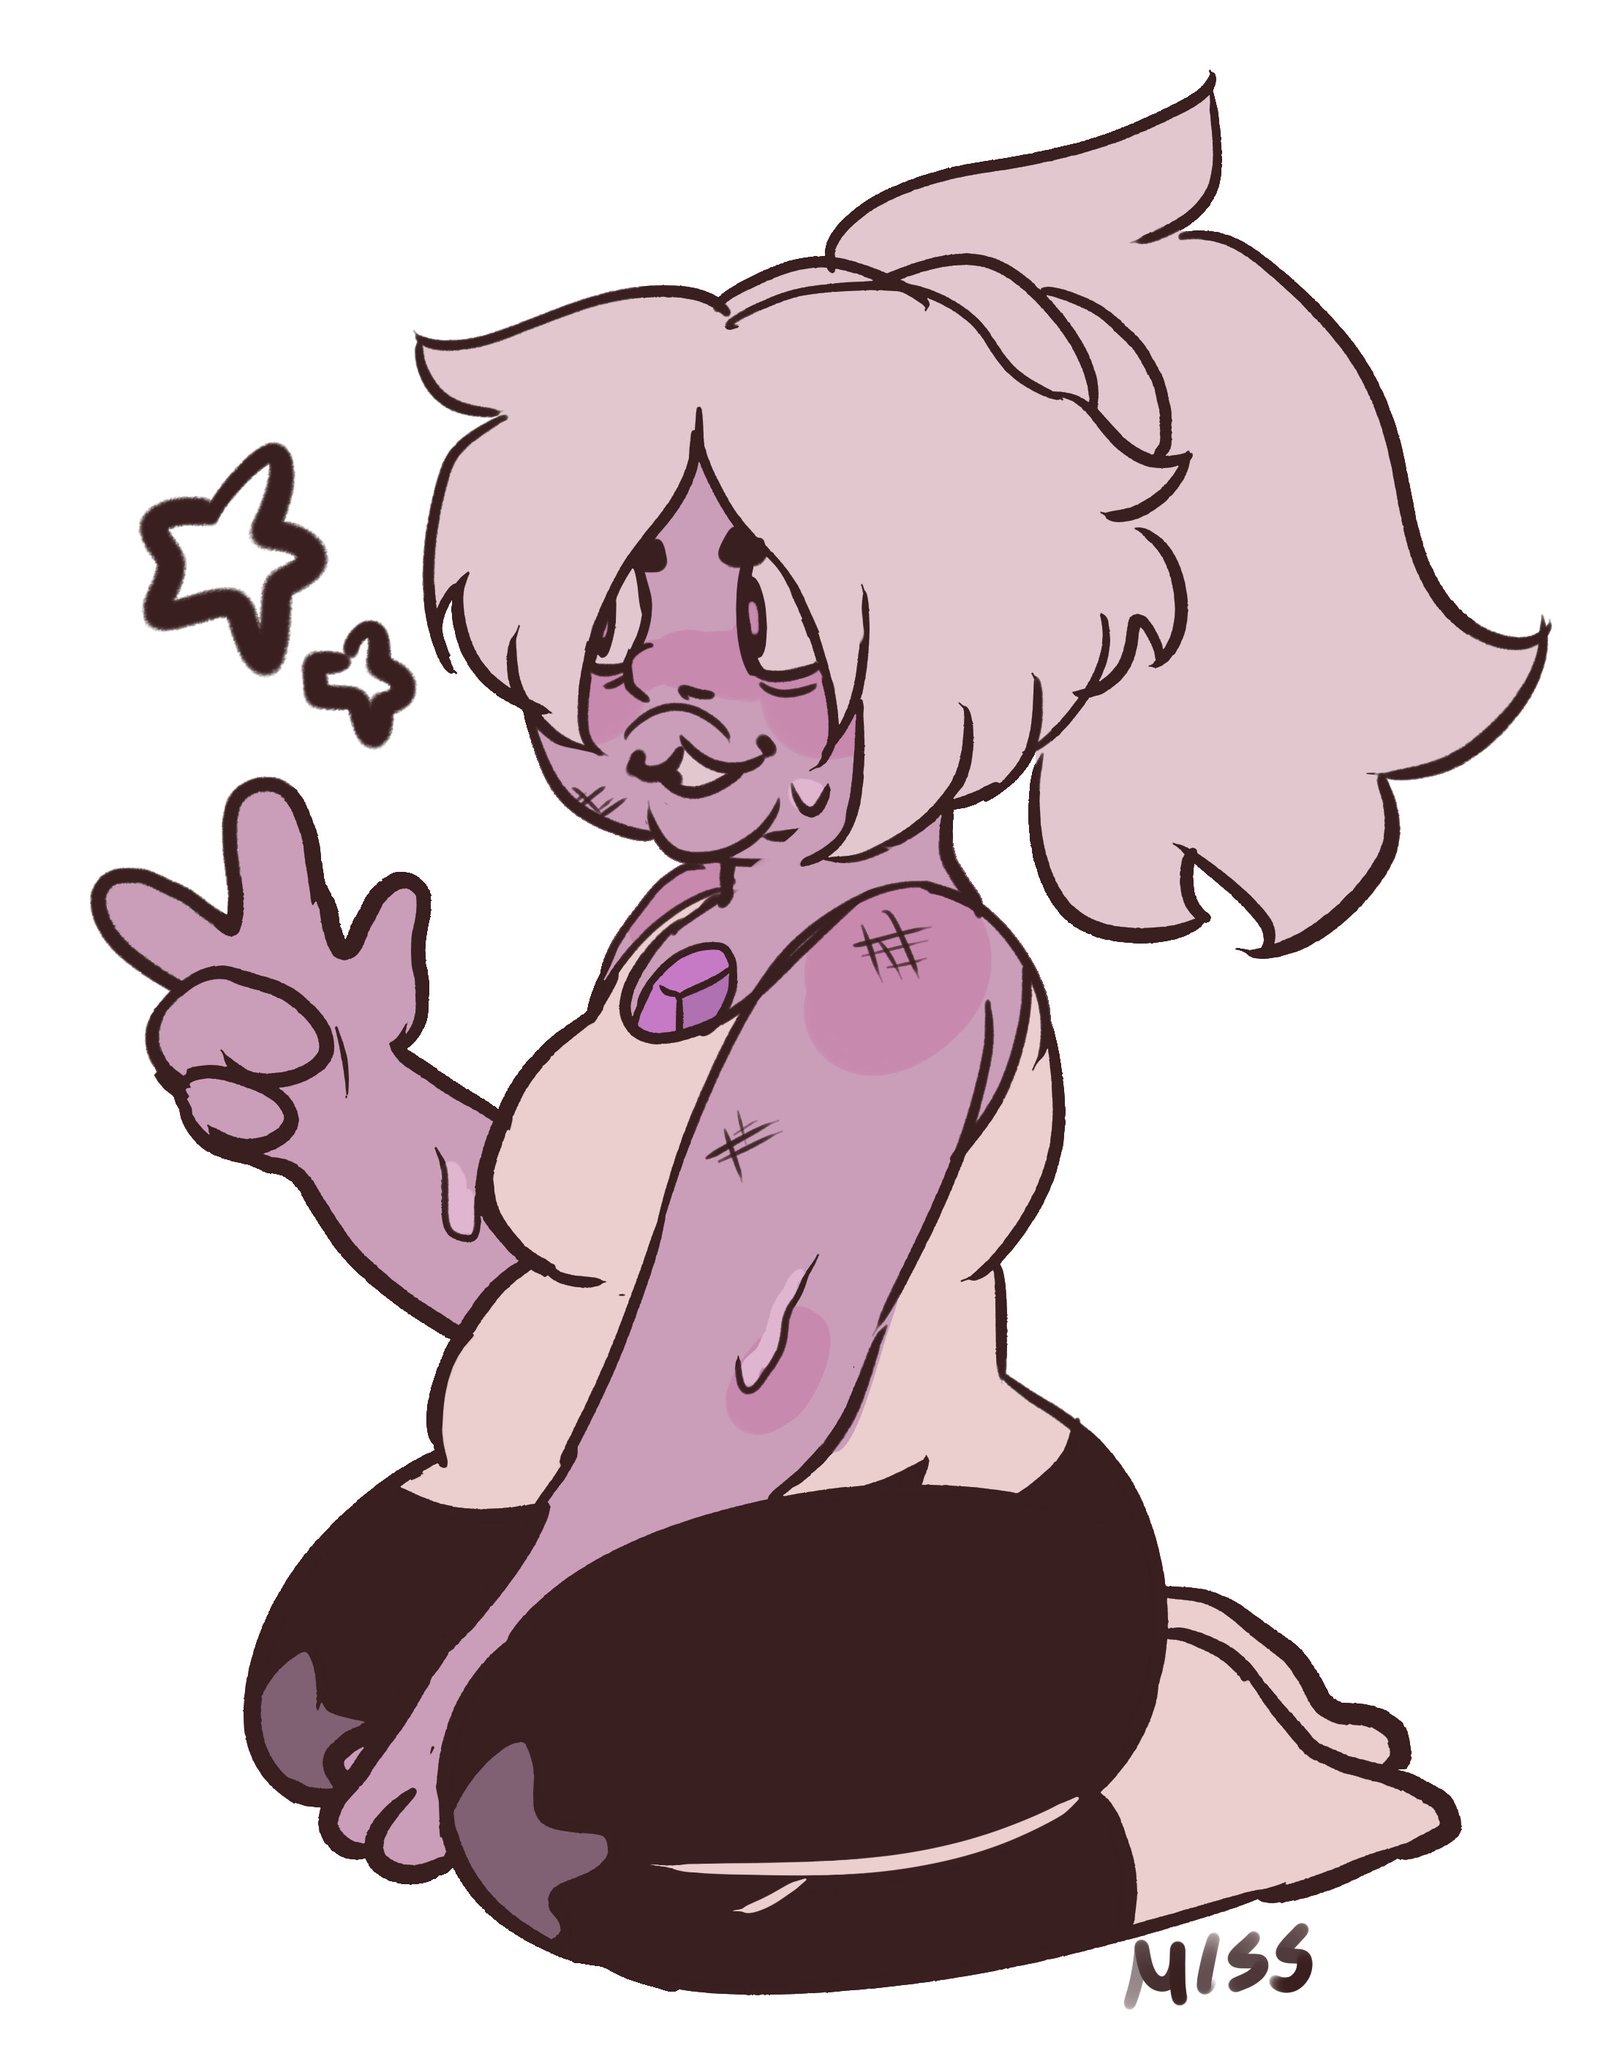 “IM HAVING A REALLY EMOTIONAL TIME RIGHT NOW BECAUSE AMETHYST”